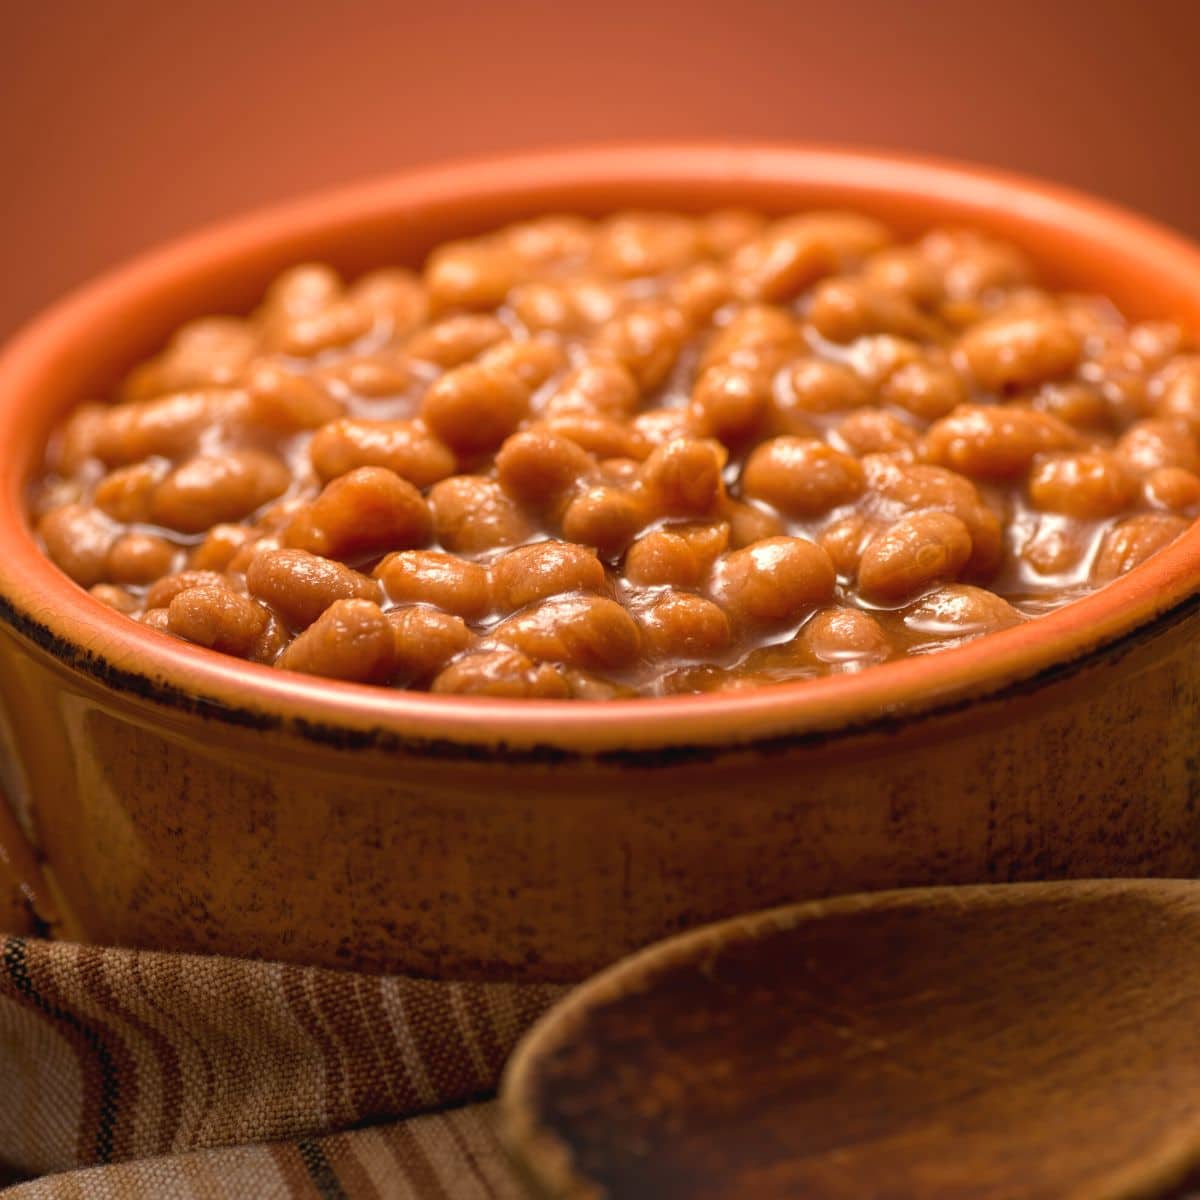 Cooked baked beans in a serving bowl.